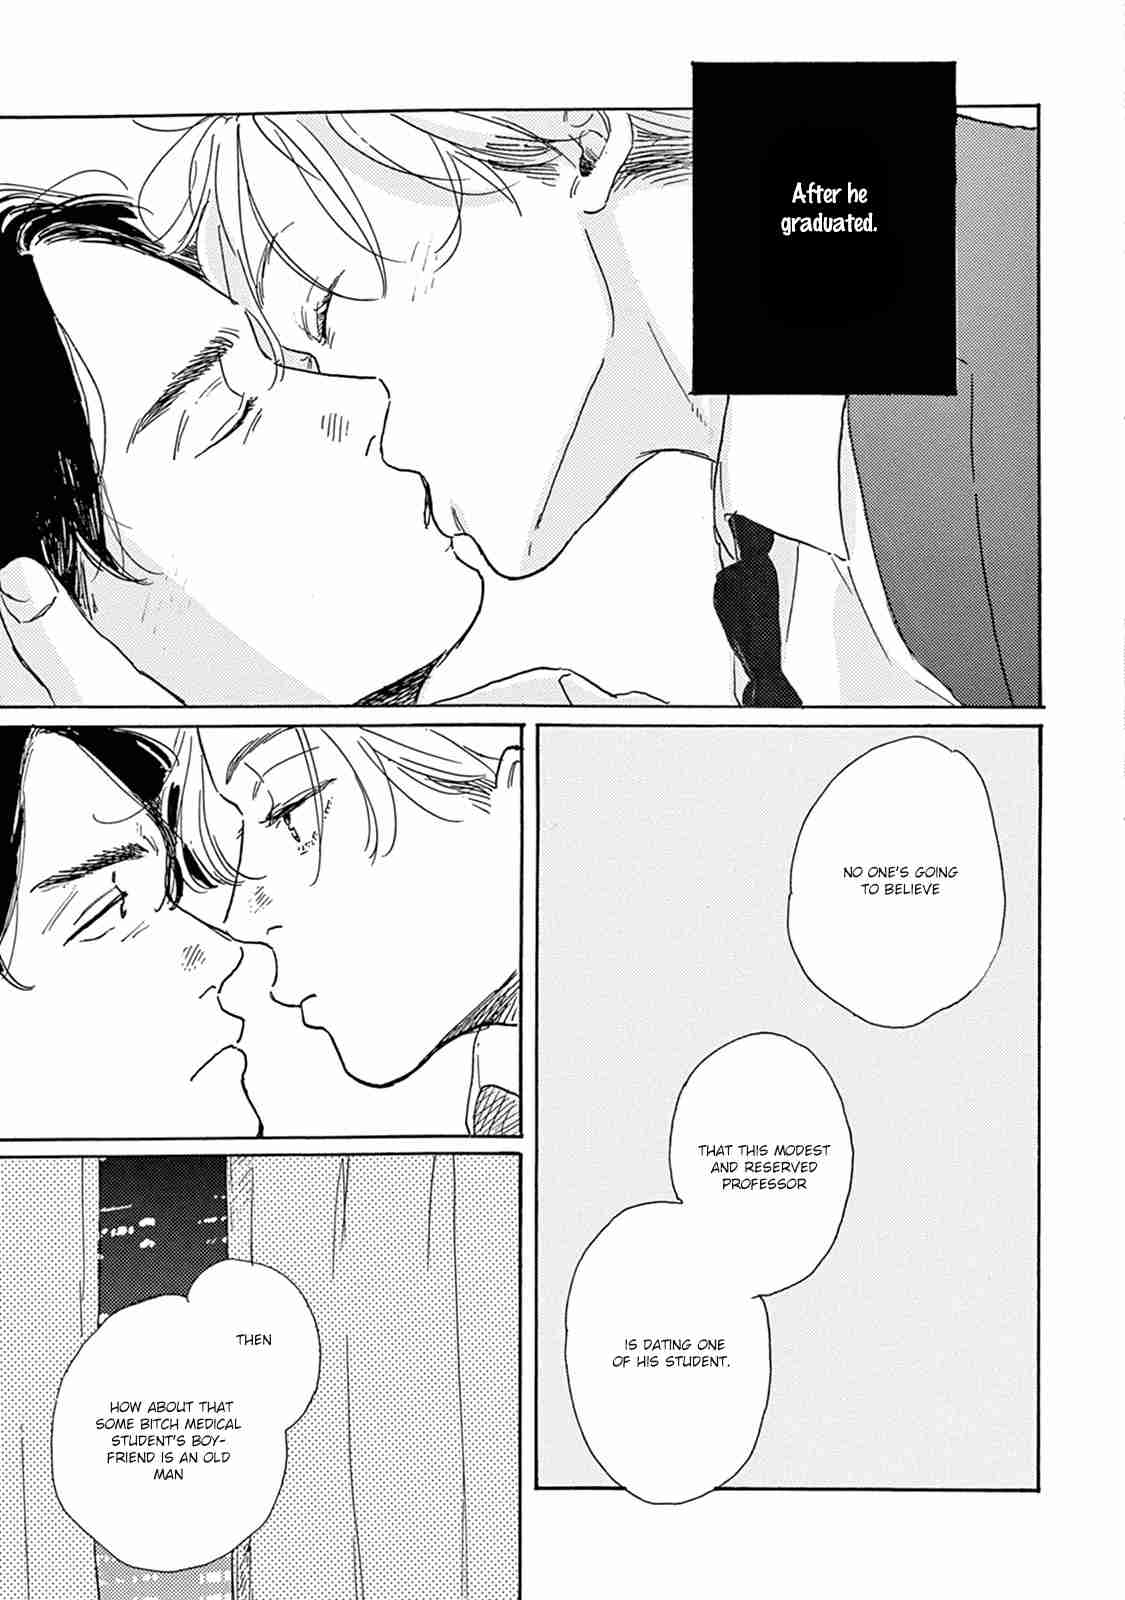 Young Bad Education Vol. 2 Ch. 5